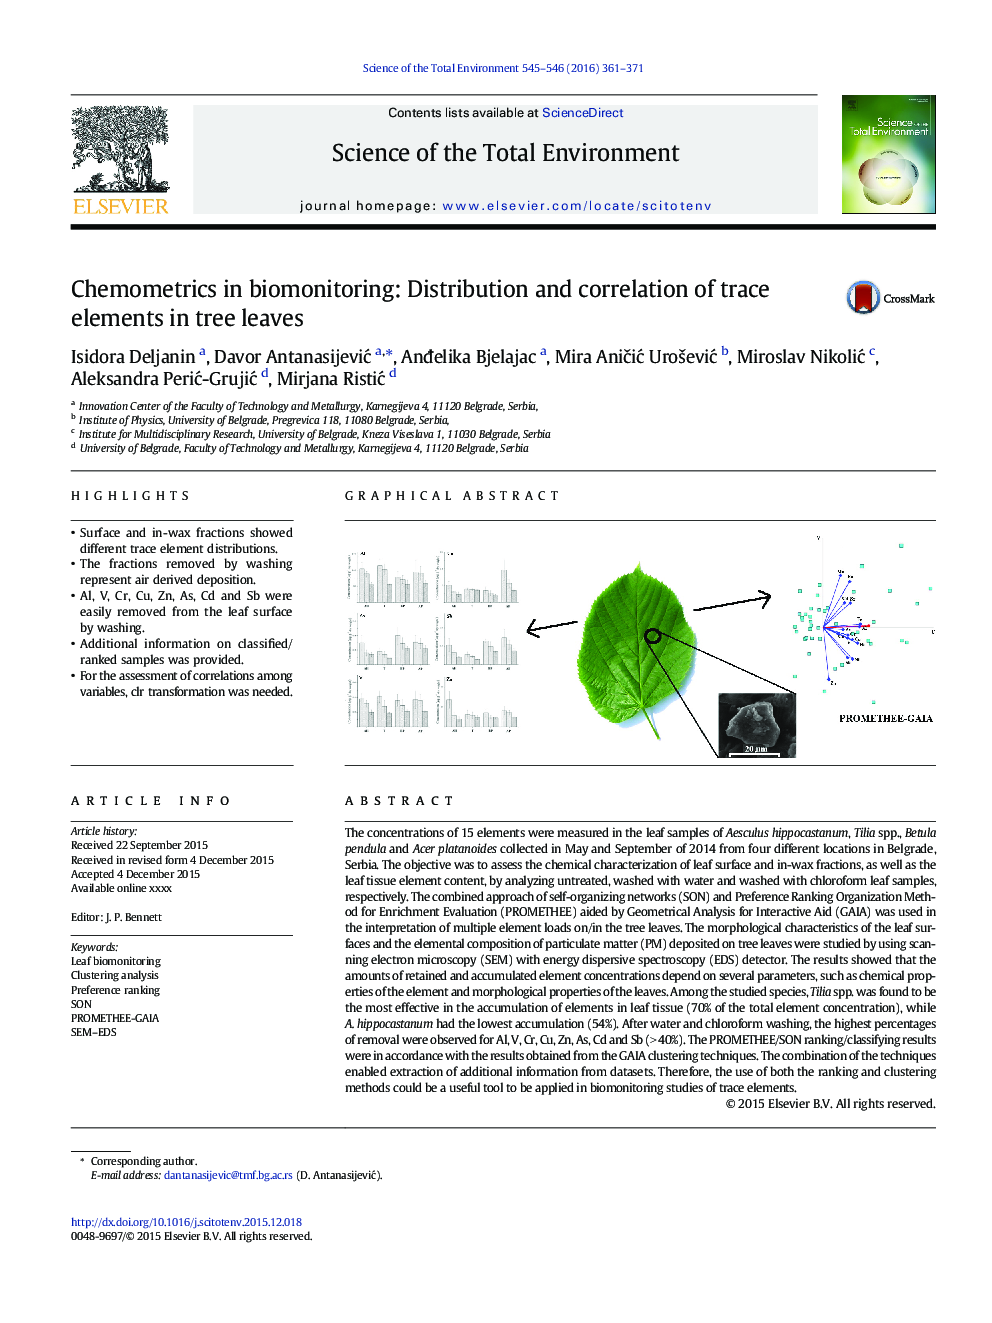 Chemometrics in biomonitoring: Distribution and correlation of trace elements in tree leaves